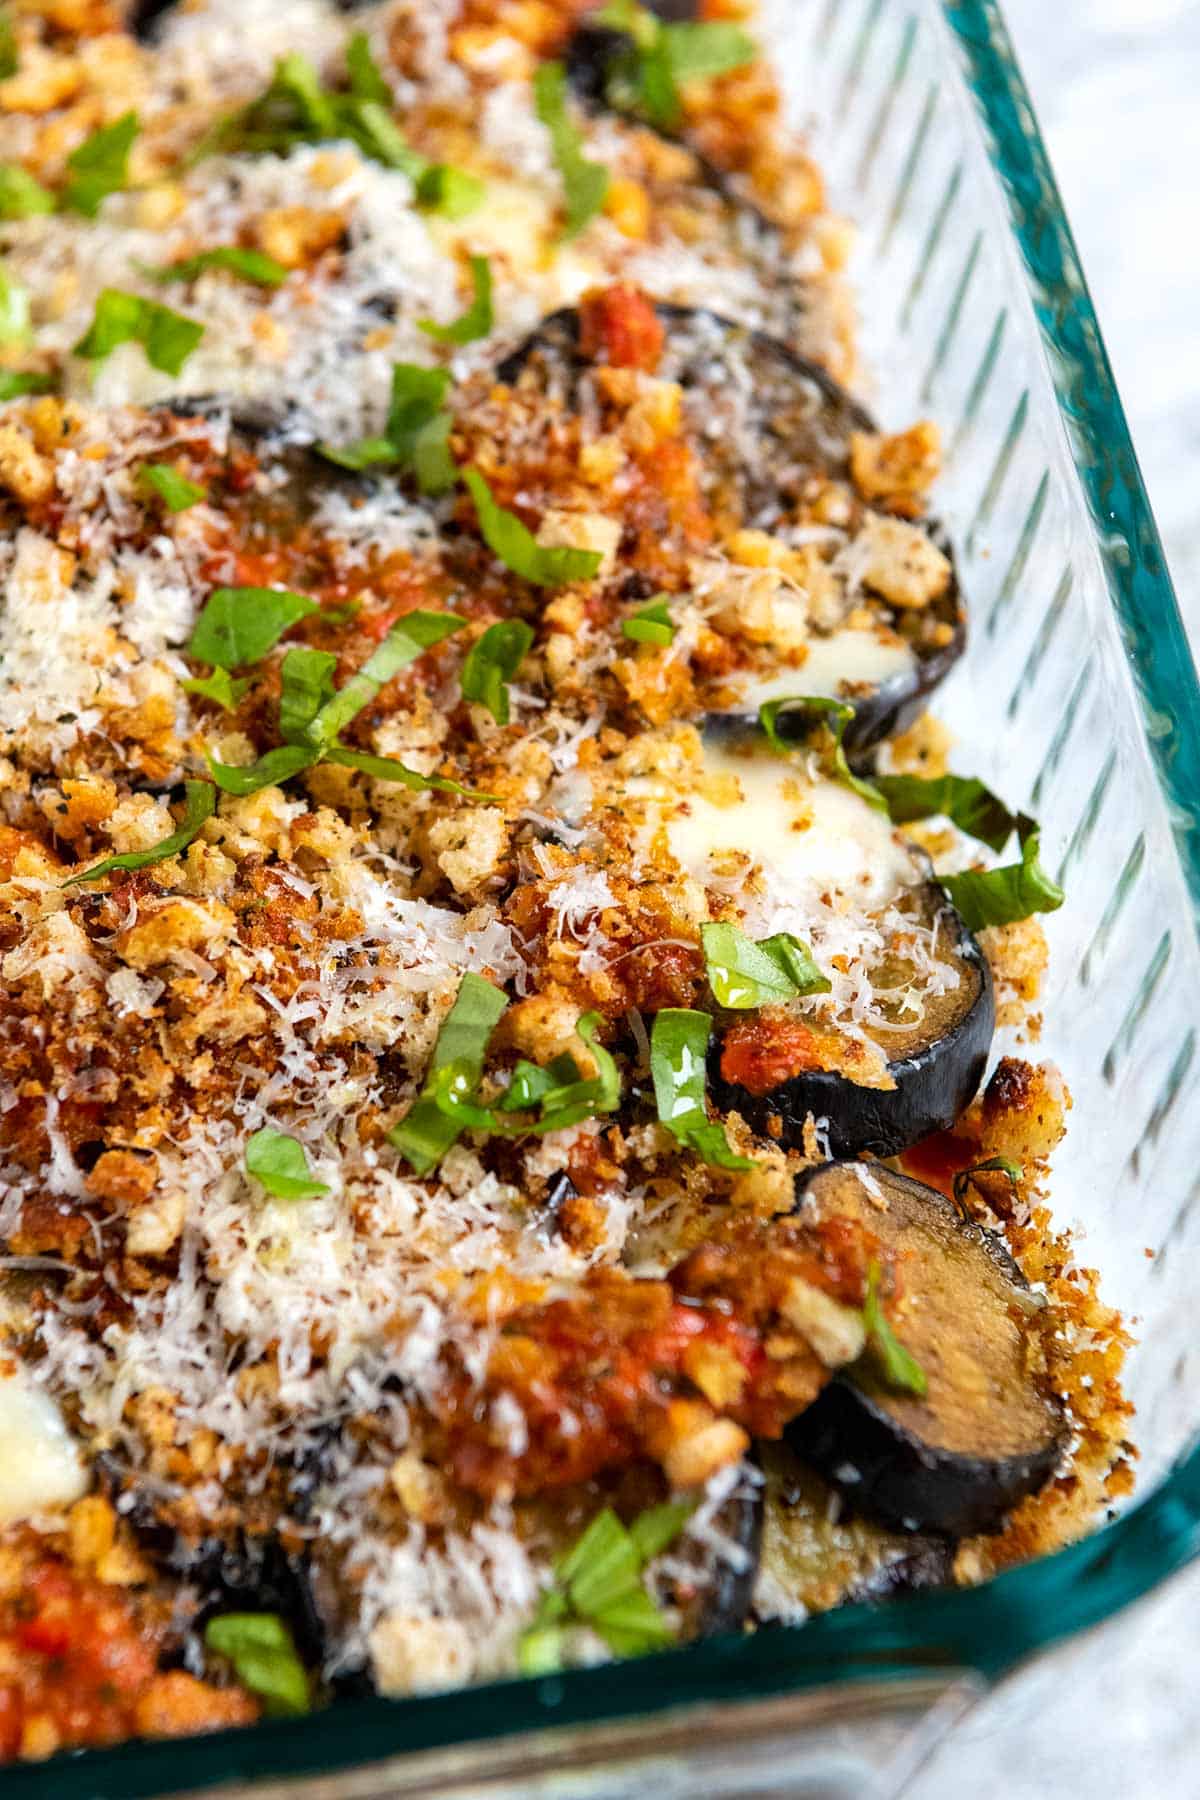 Eggplant parmesan with roasted eggplant slices, parmesan cheese, mozzarella and breadcrumbs on top.